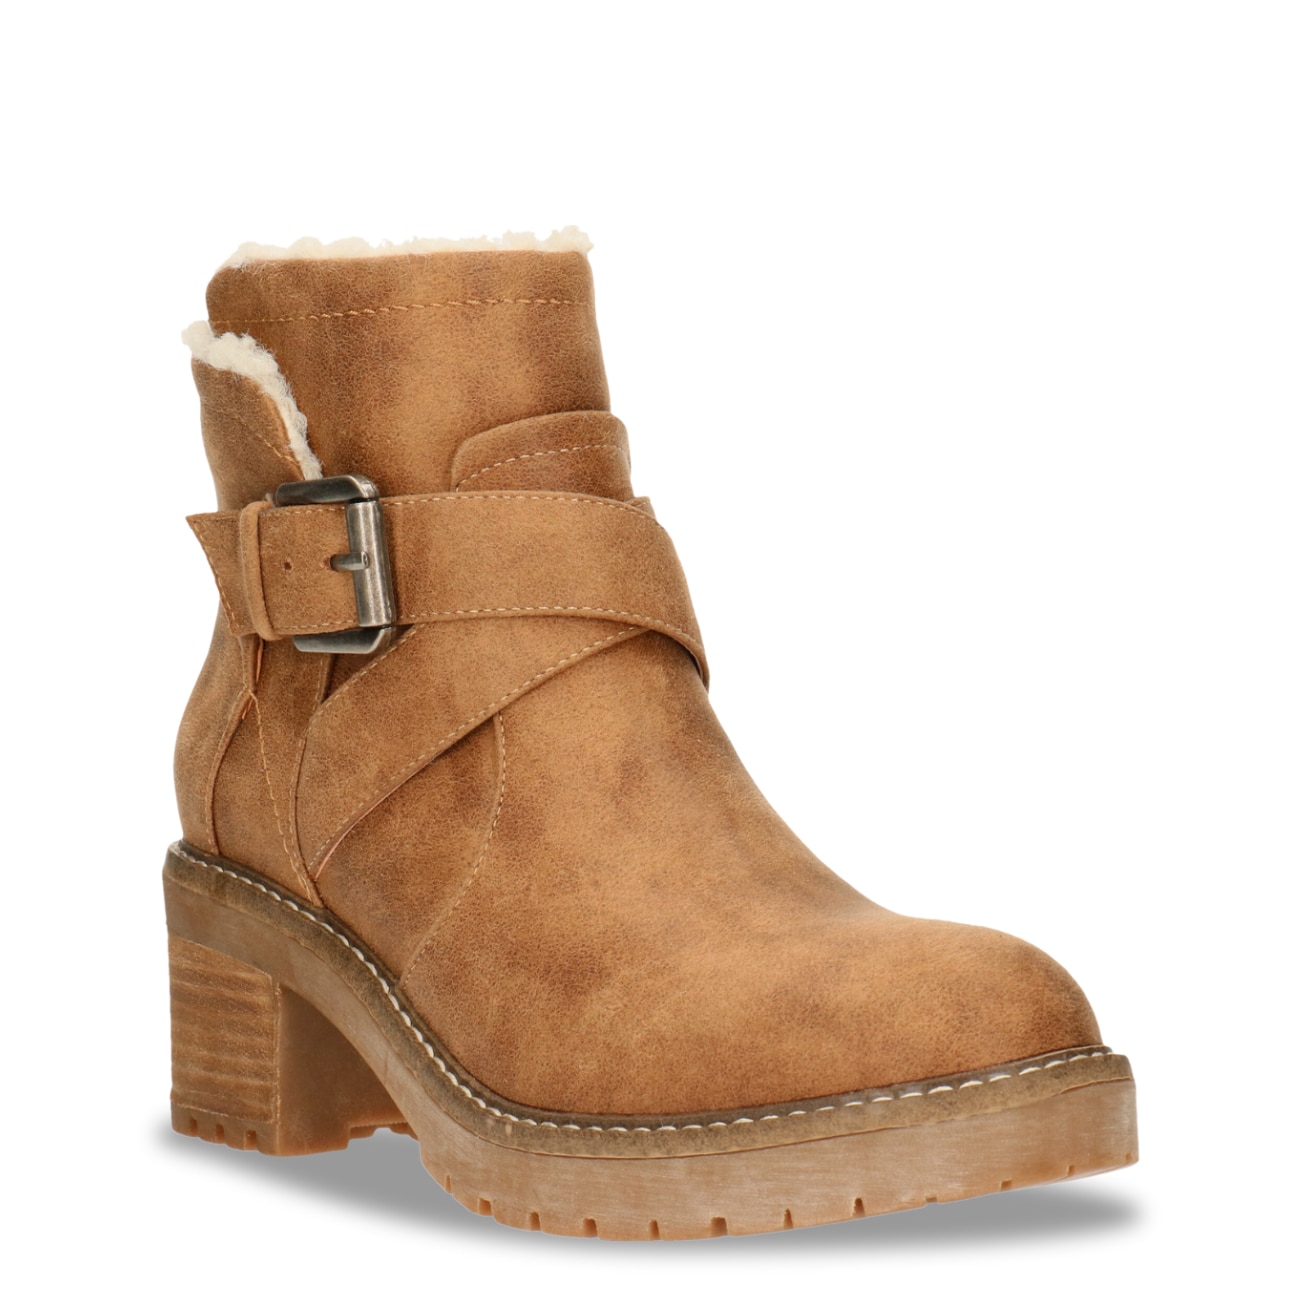 Moto Shearling Ankle Bootie